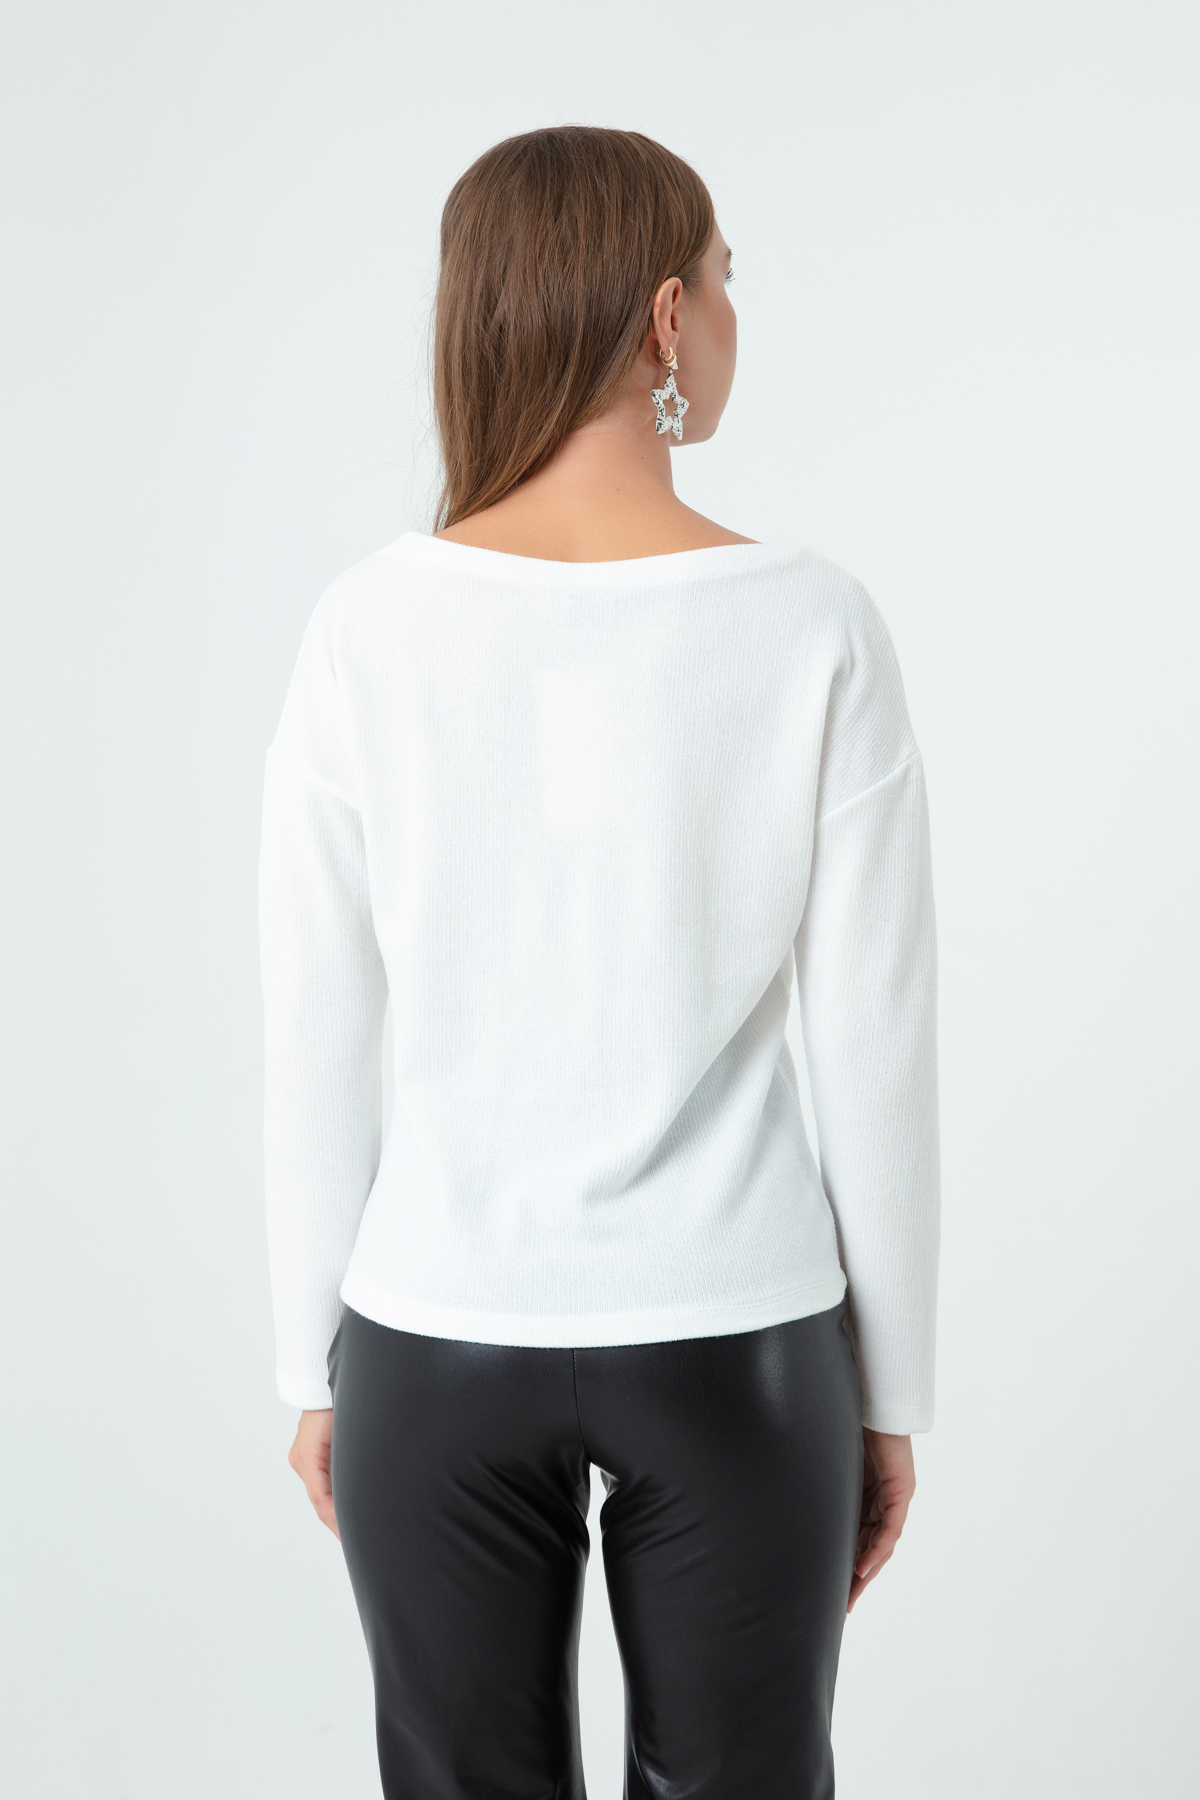 Women's White Accessory Detailed Knitted Sweater